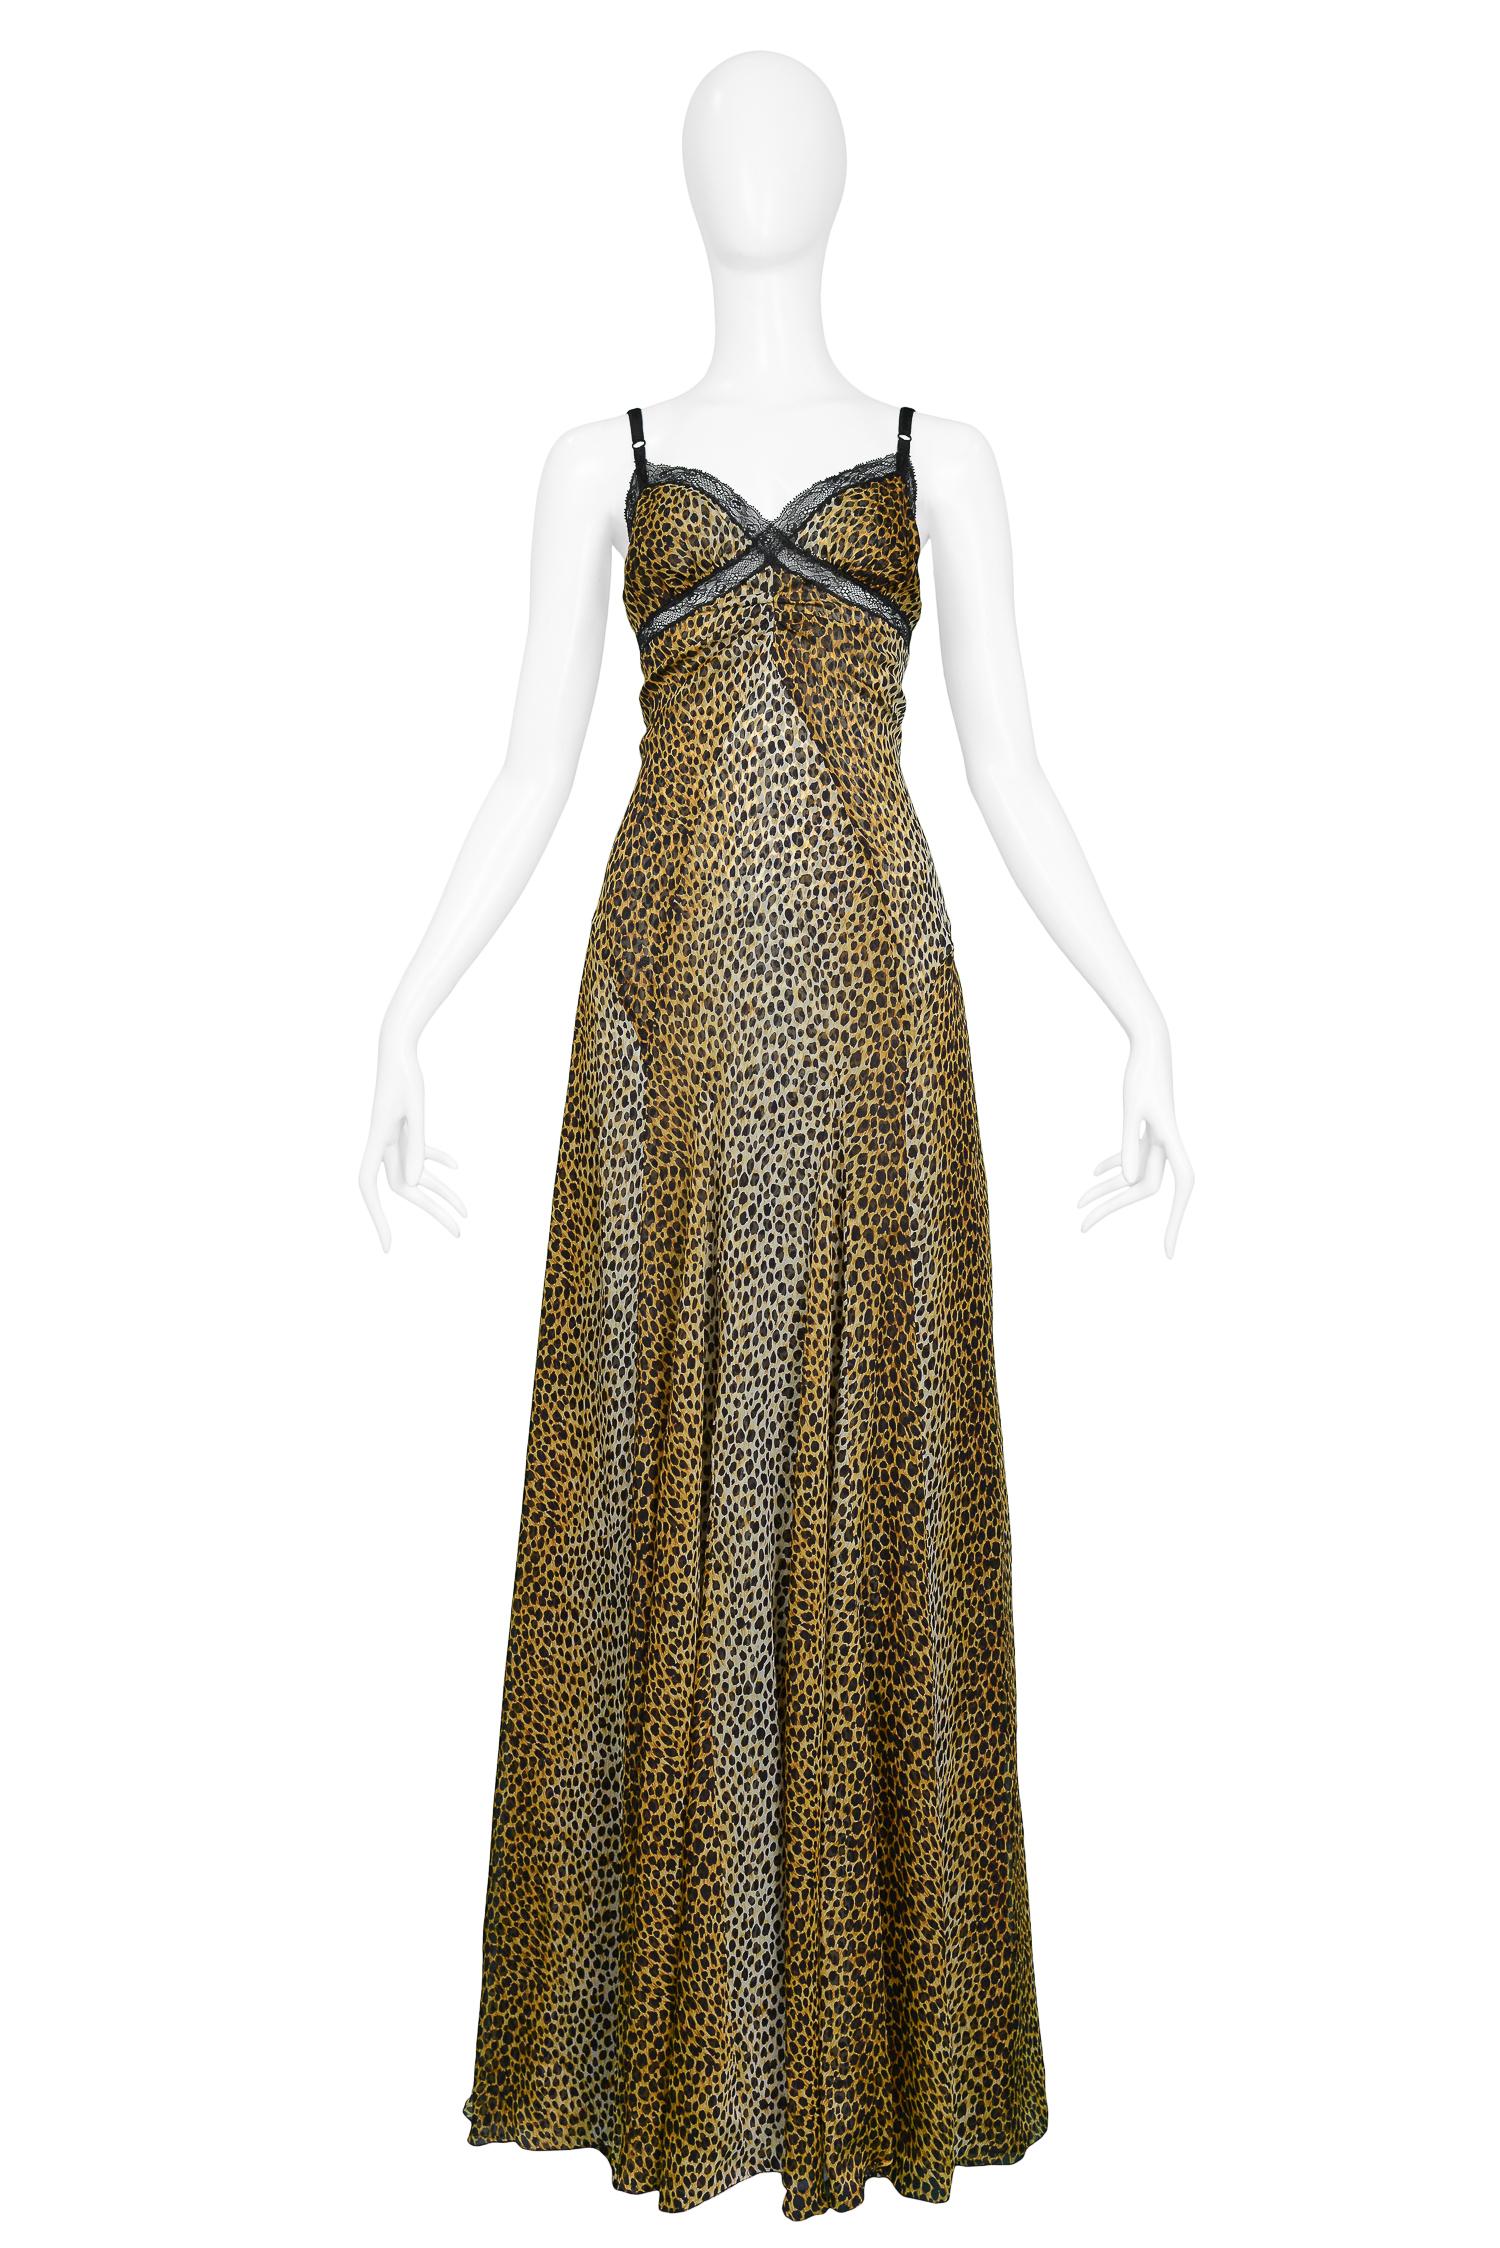 Vintage D&G by Dolce & Gabbana leopard print silk slip gown with black lace insets at chest, train at hem and back zipper closure.

Excellent Condition.

Size: 40